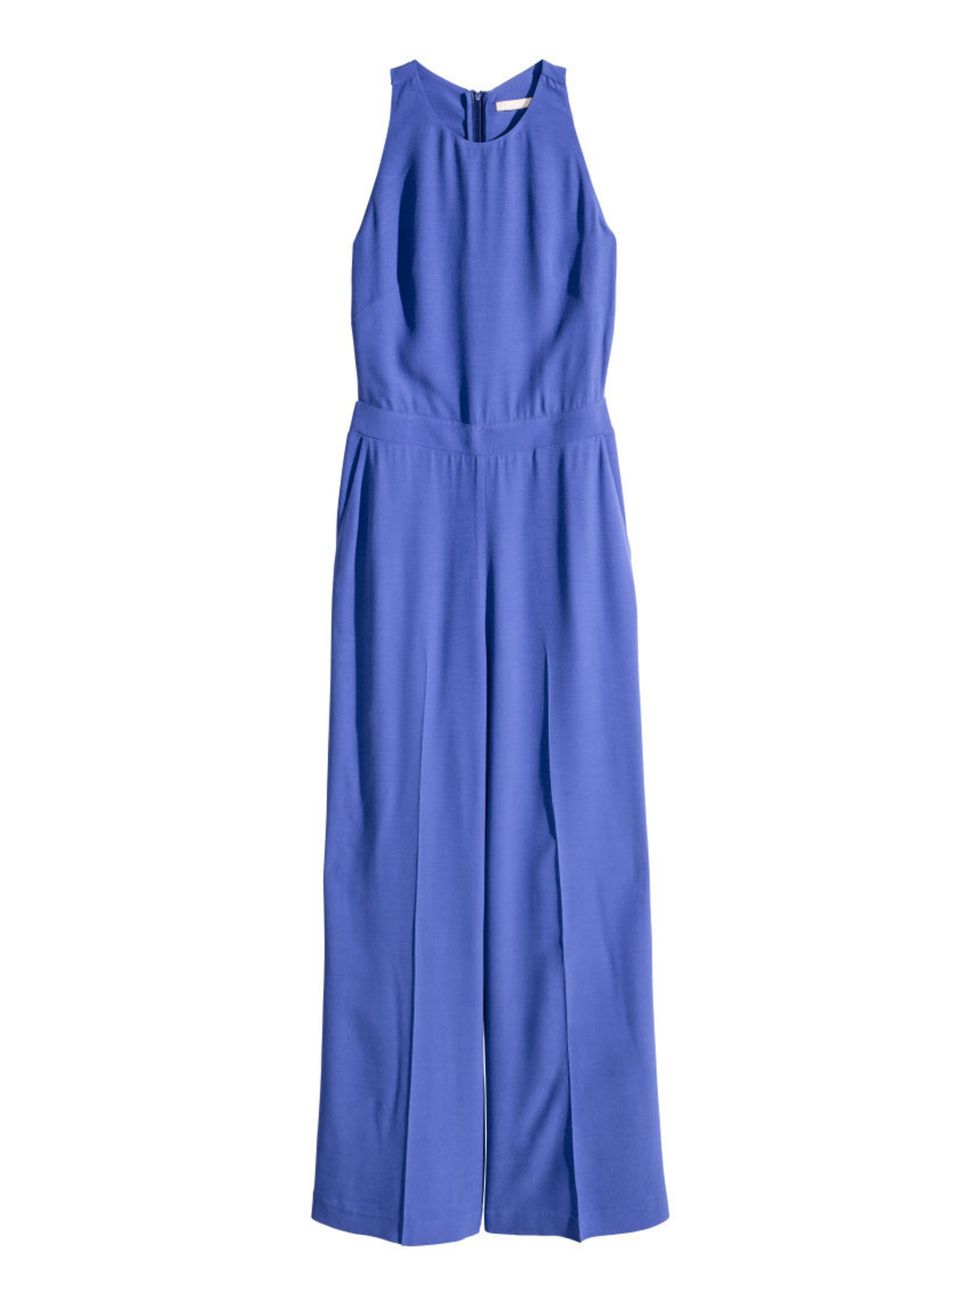 <p><a href="http://www.hm.com/gb/product/19679?article=19679-A" target="_blank">H&M</a> jumpsuit, £39.99</p>